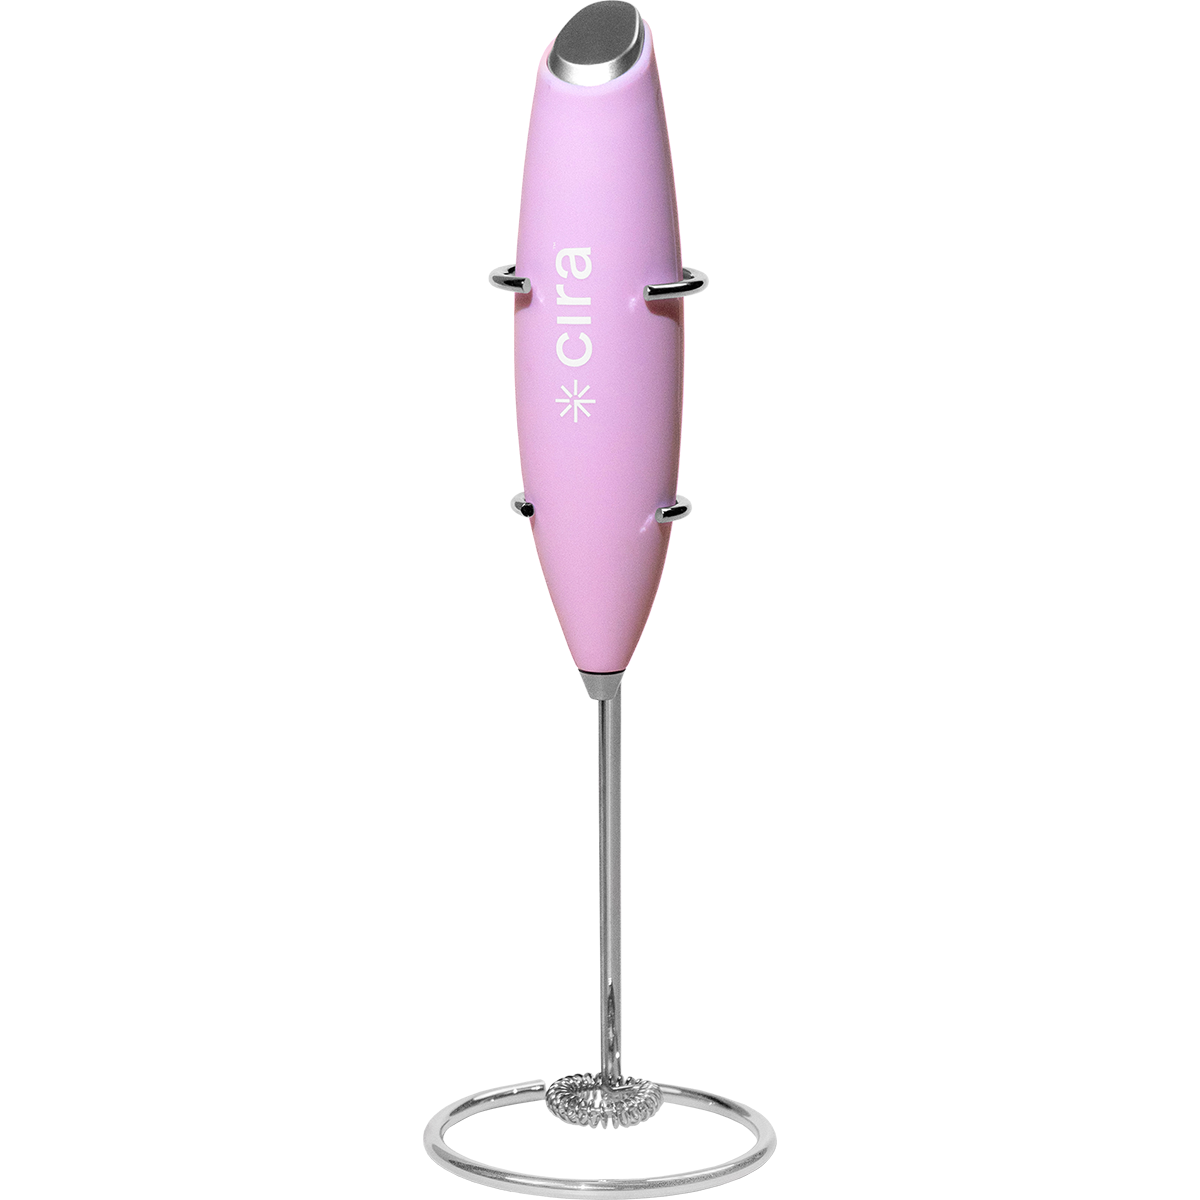 Cira Nutrition Pink Frother with Cira logo. On a metal stand.